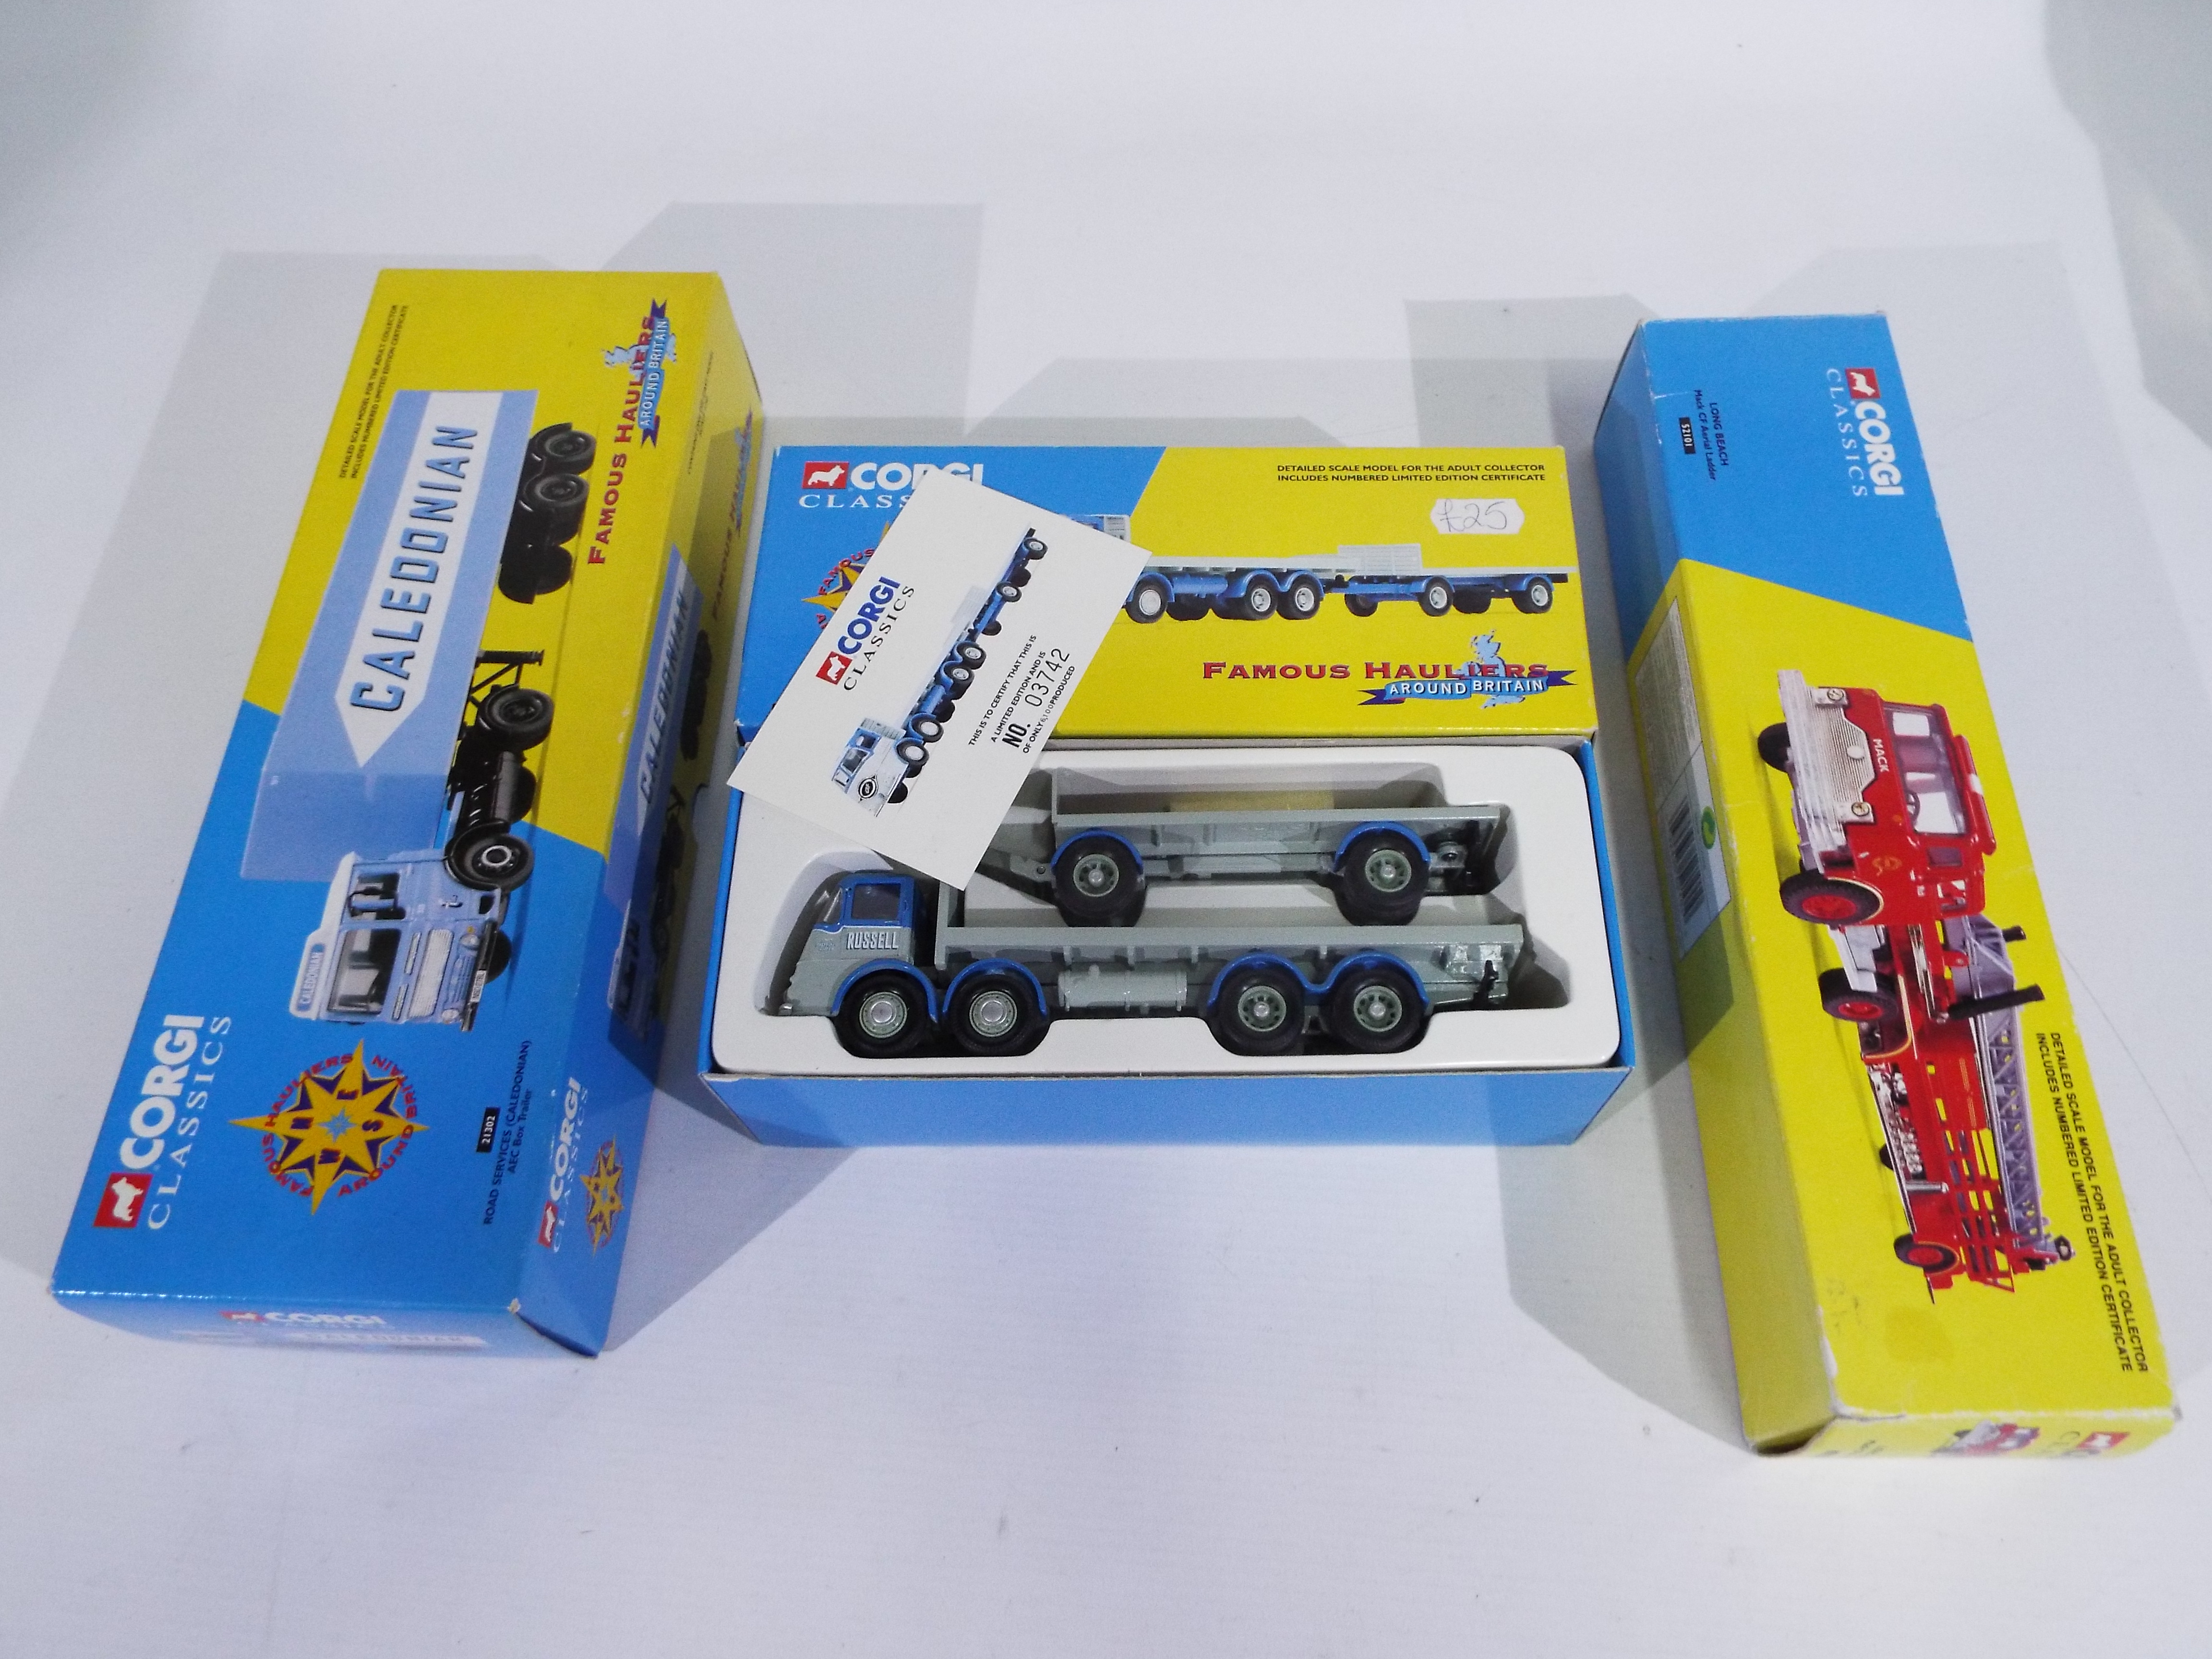 Corgi, Other - 16 boxed diecast and plastic model vehicles in various scales, mainly by Corgi. - Image 7 of 7